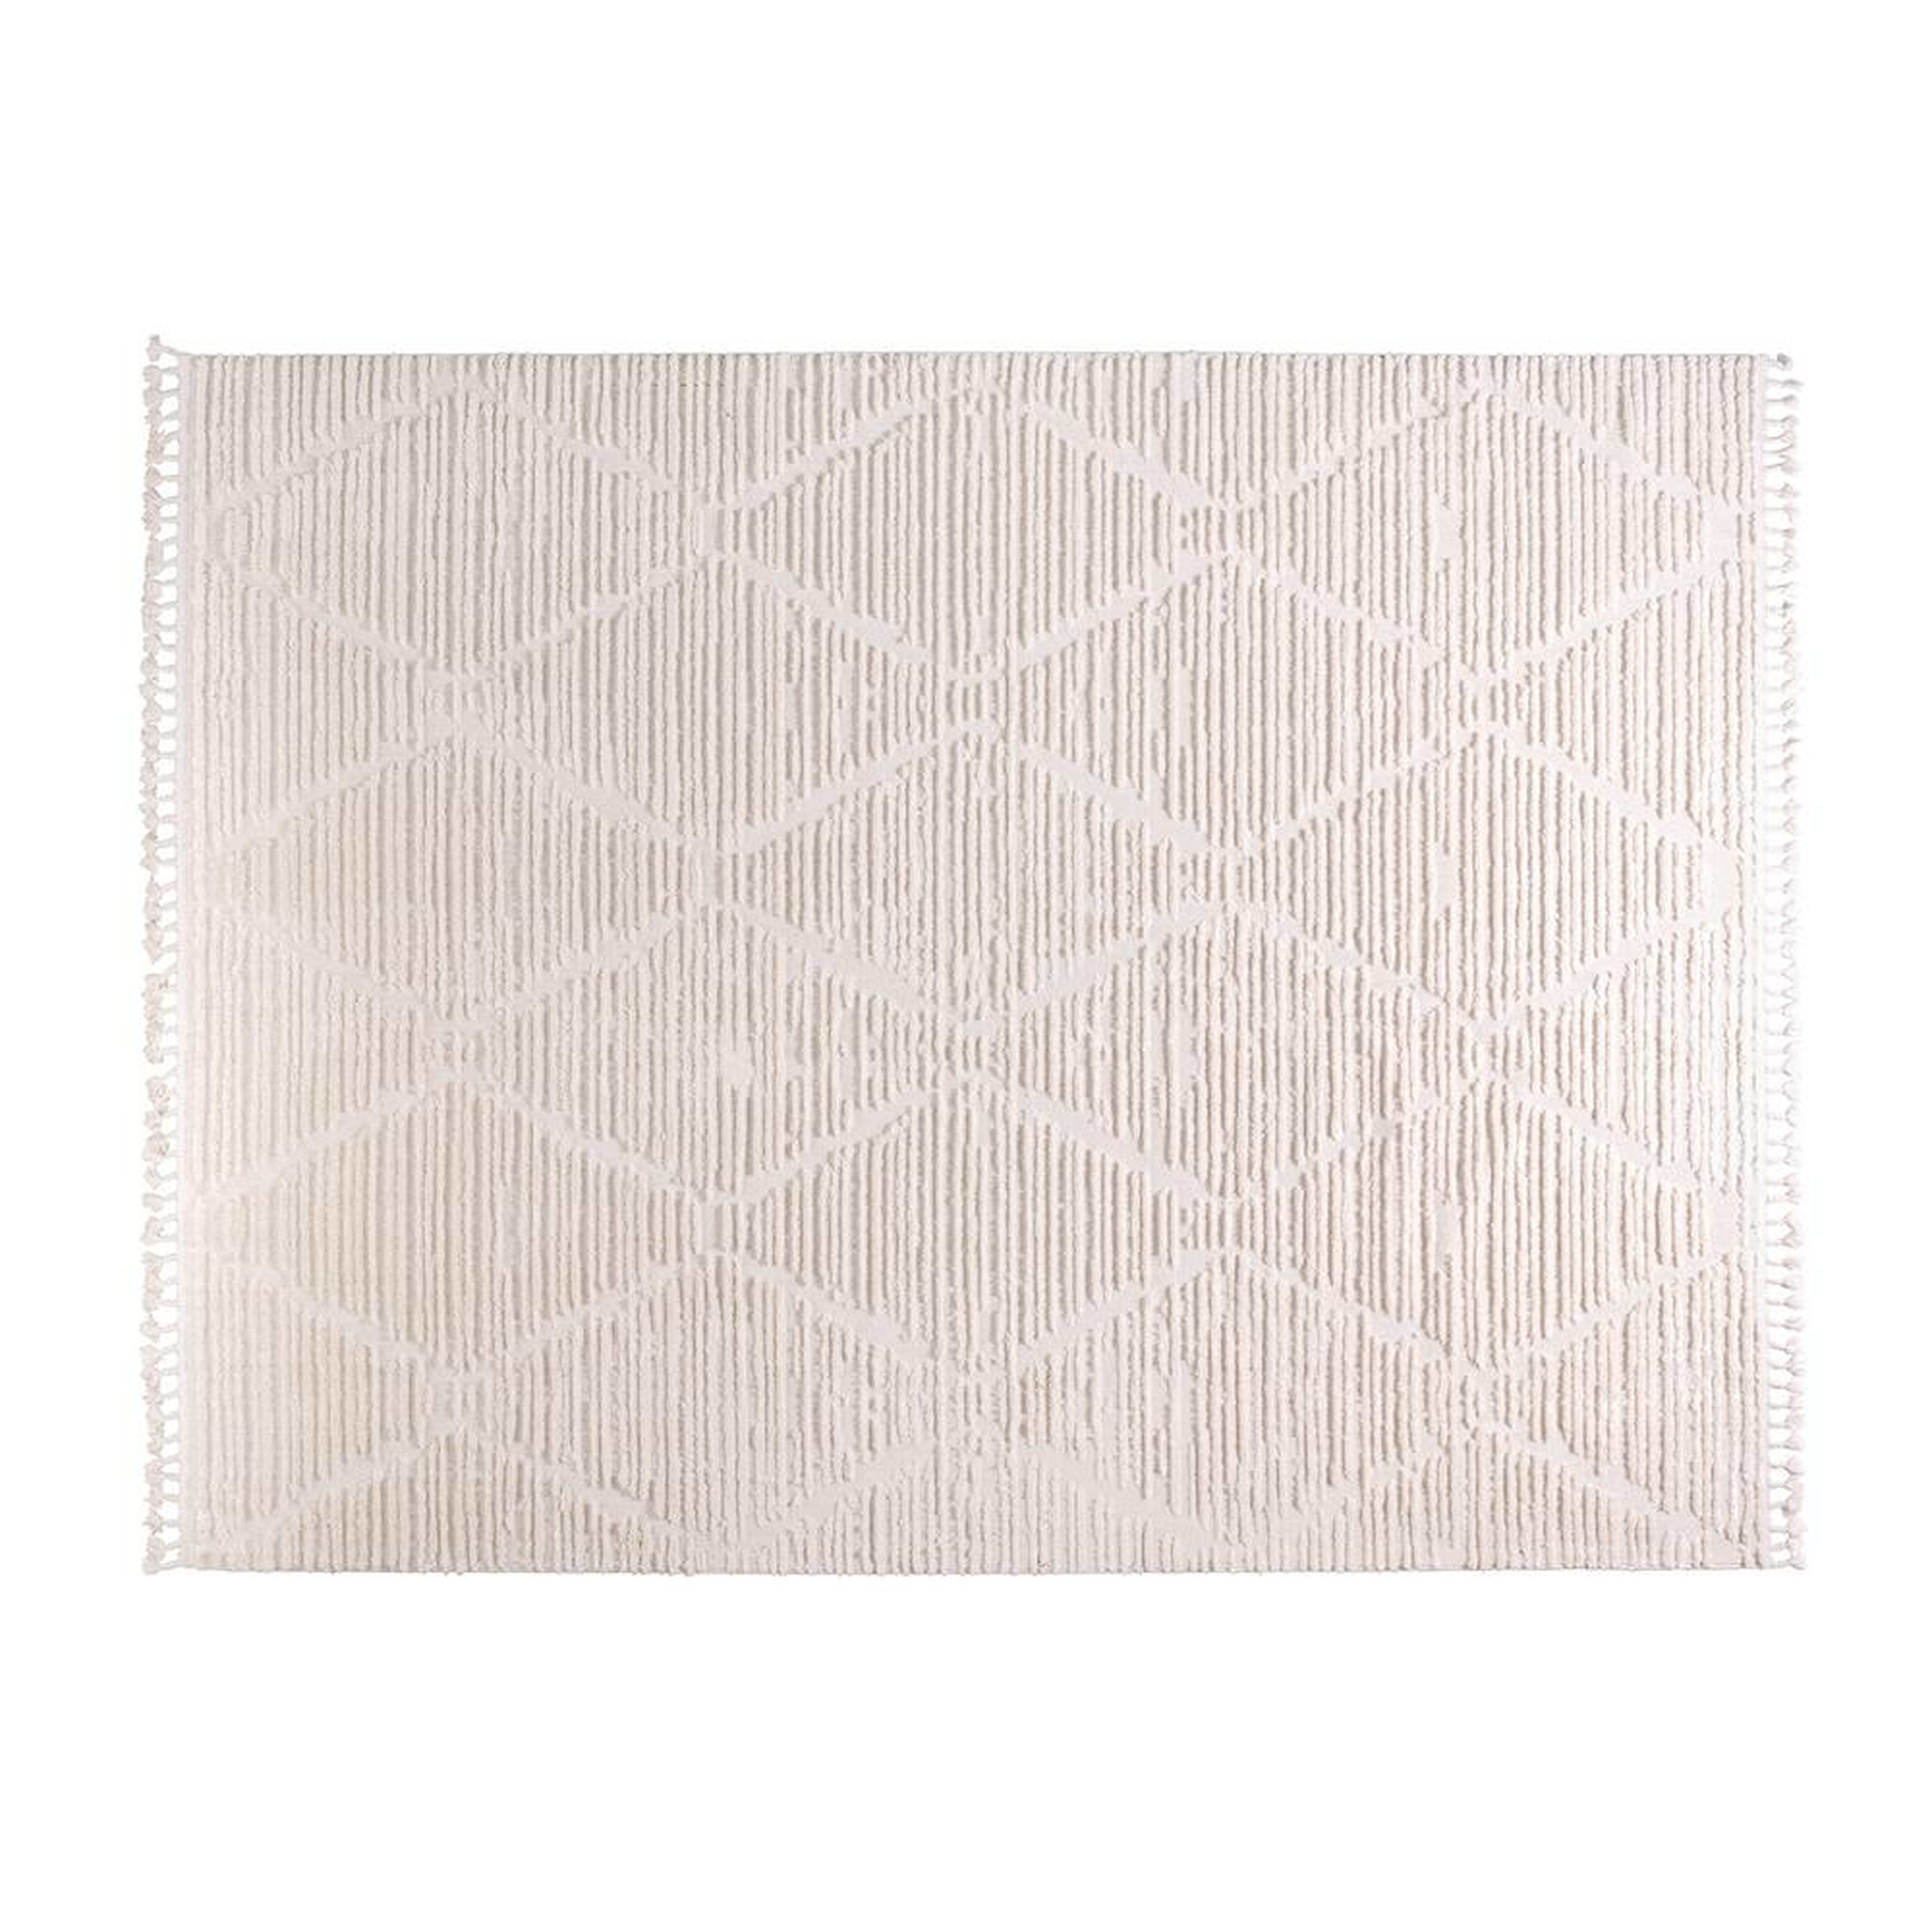 INK & IVY TERNI CREAM 6X9 POLYESTER AREA RUG, Ivory - Home Depot